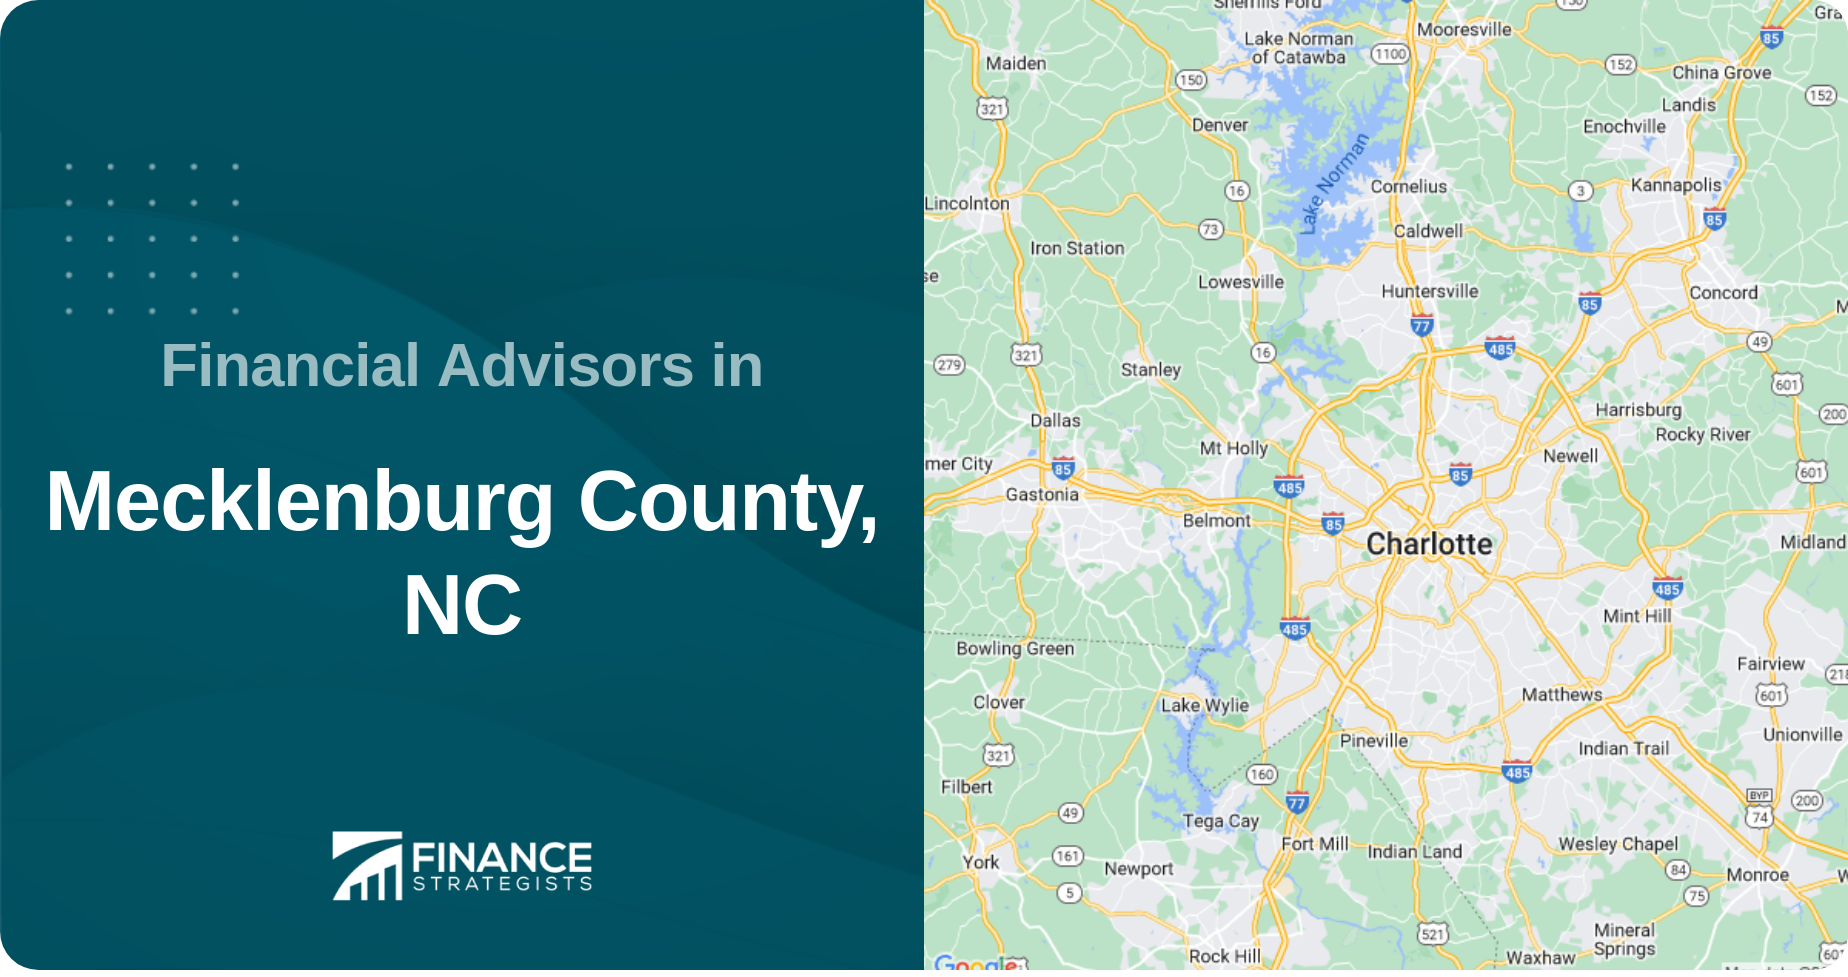 Financial Advisors in Mecklenburg County, NC